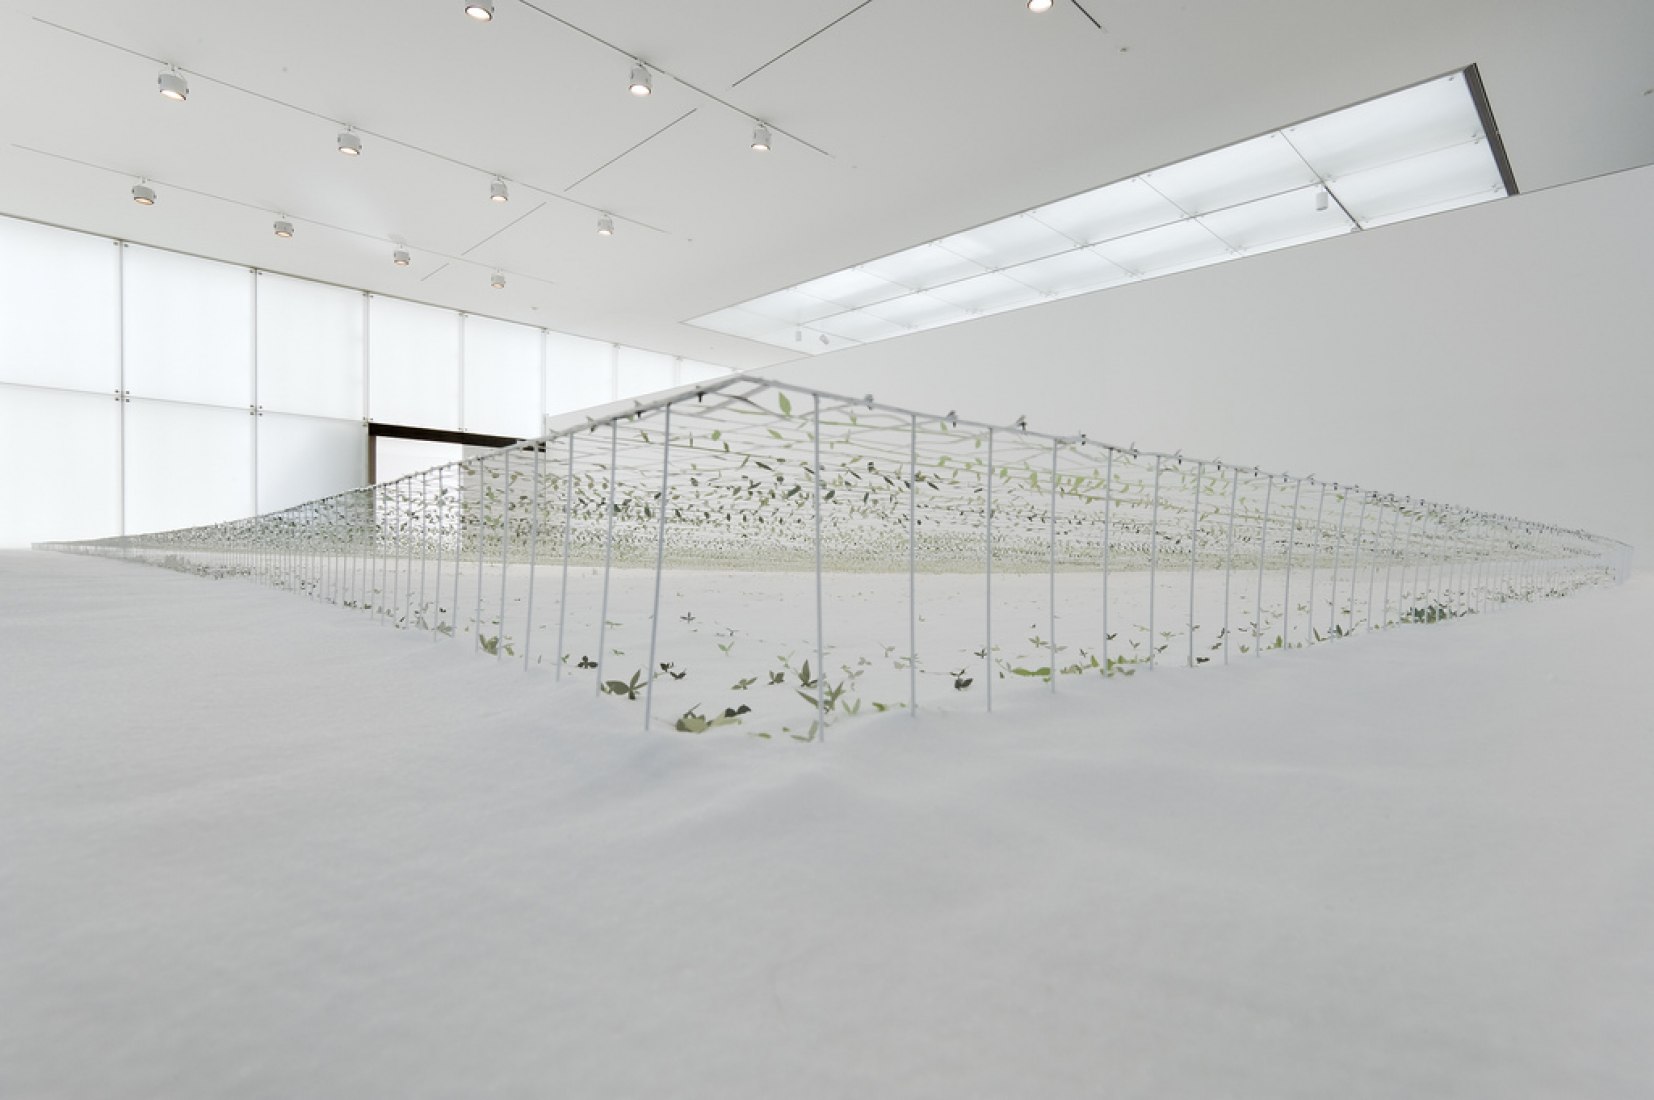 JUNYA ISHIGAMI. How small? How vast? How archItecture grows? | The 